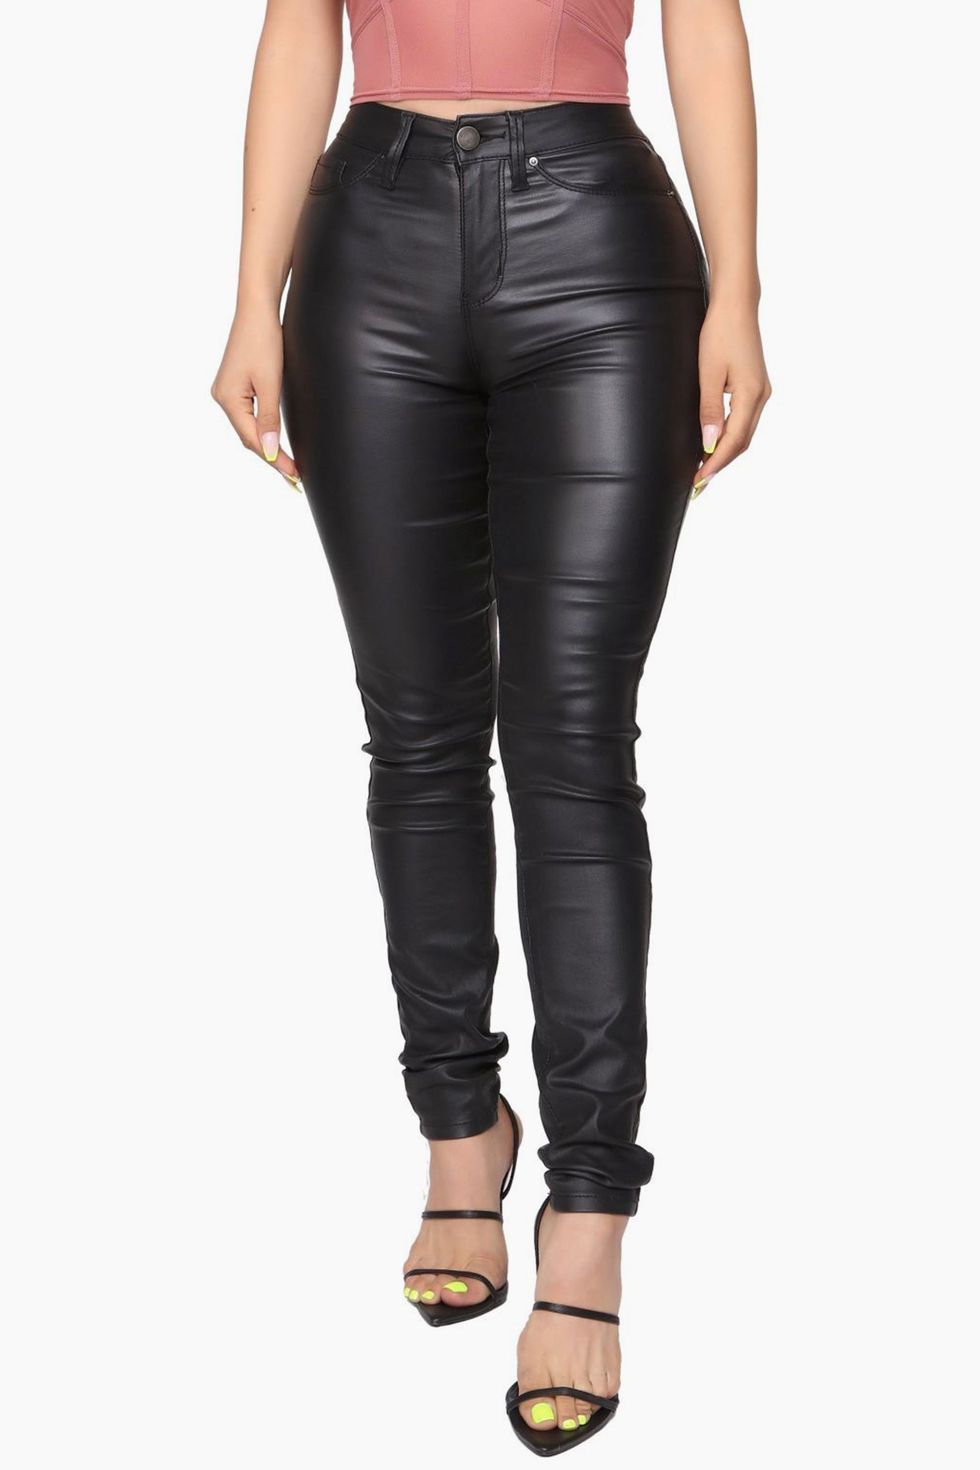 Best Pants – Top Leather Pants for Women 2023